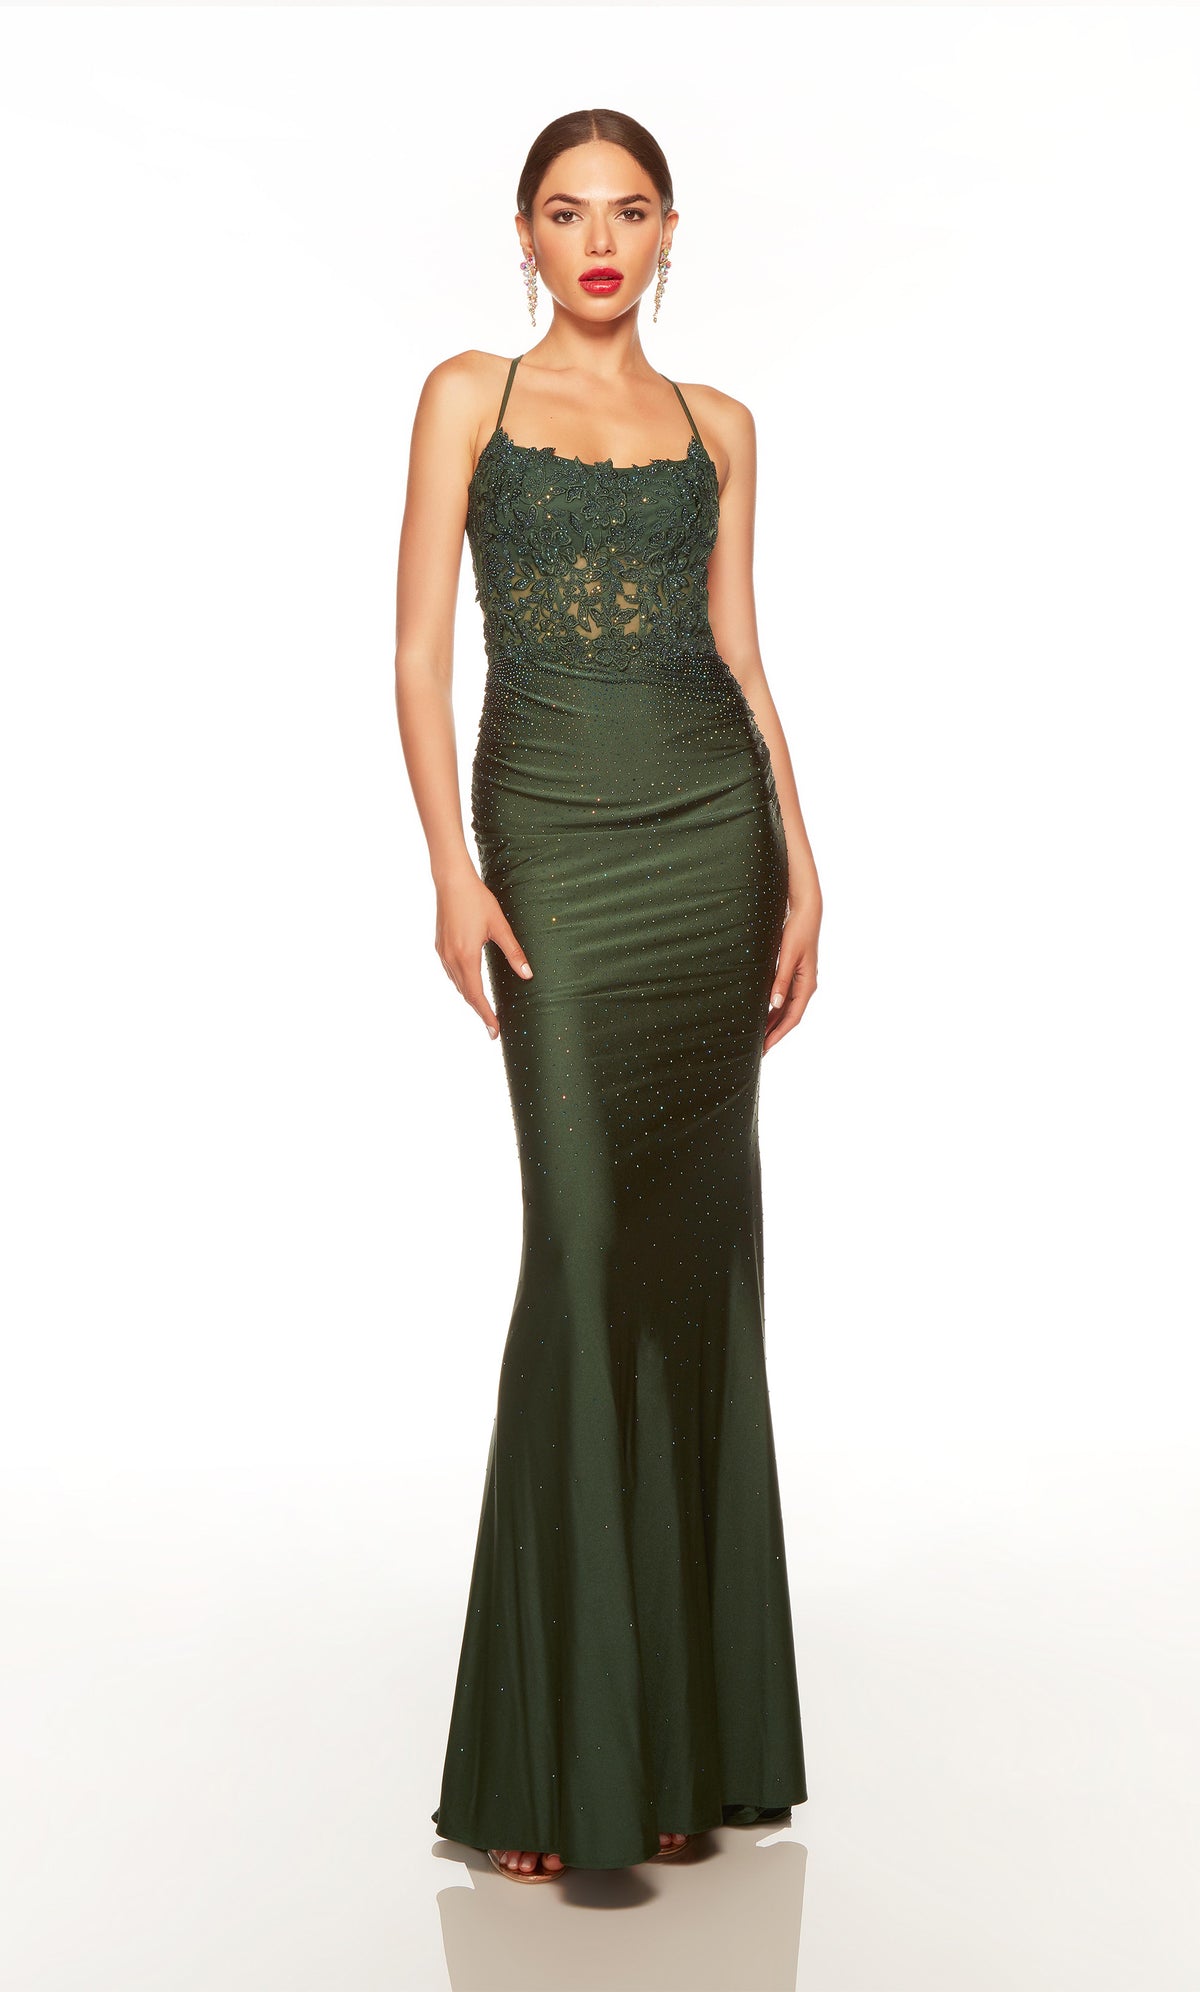 Fitted green corset dress with a sheer lace bodice and heat set stone detail throughout. 